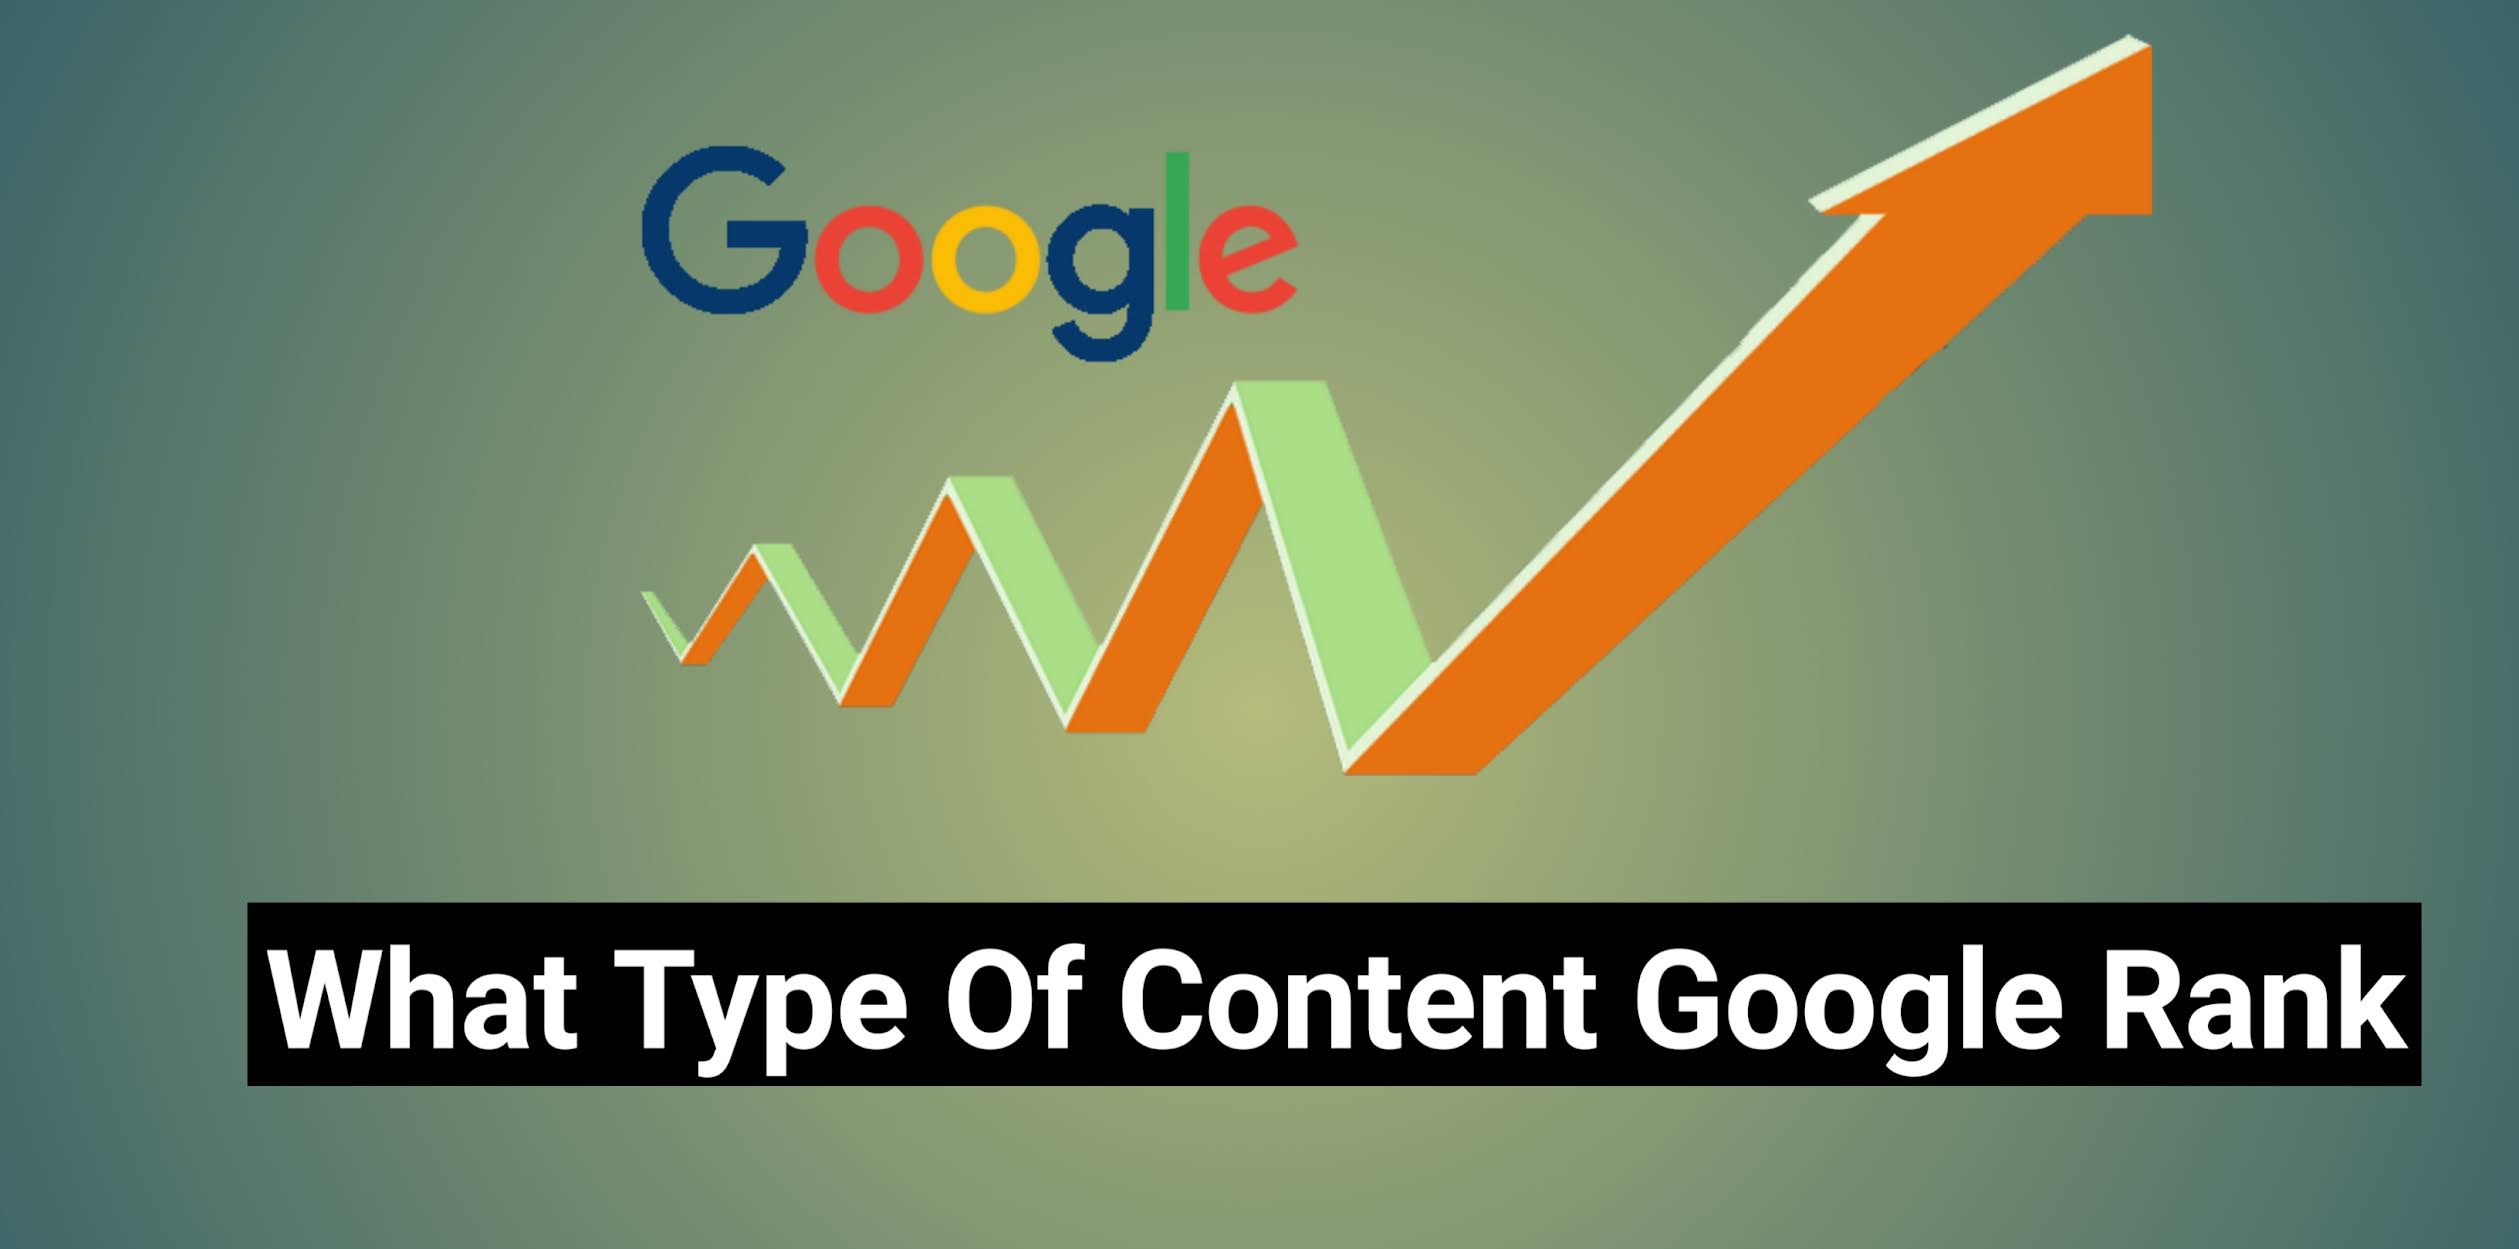 What Type Of Content Google Rank